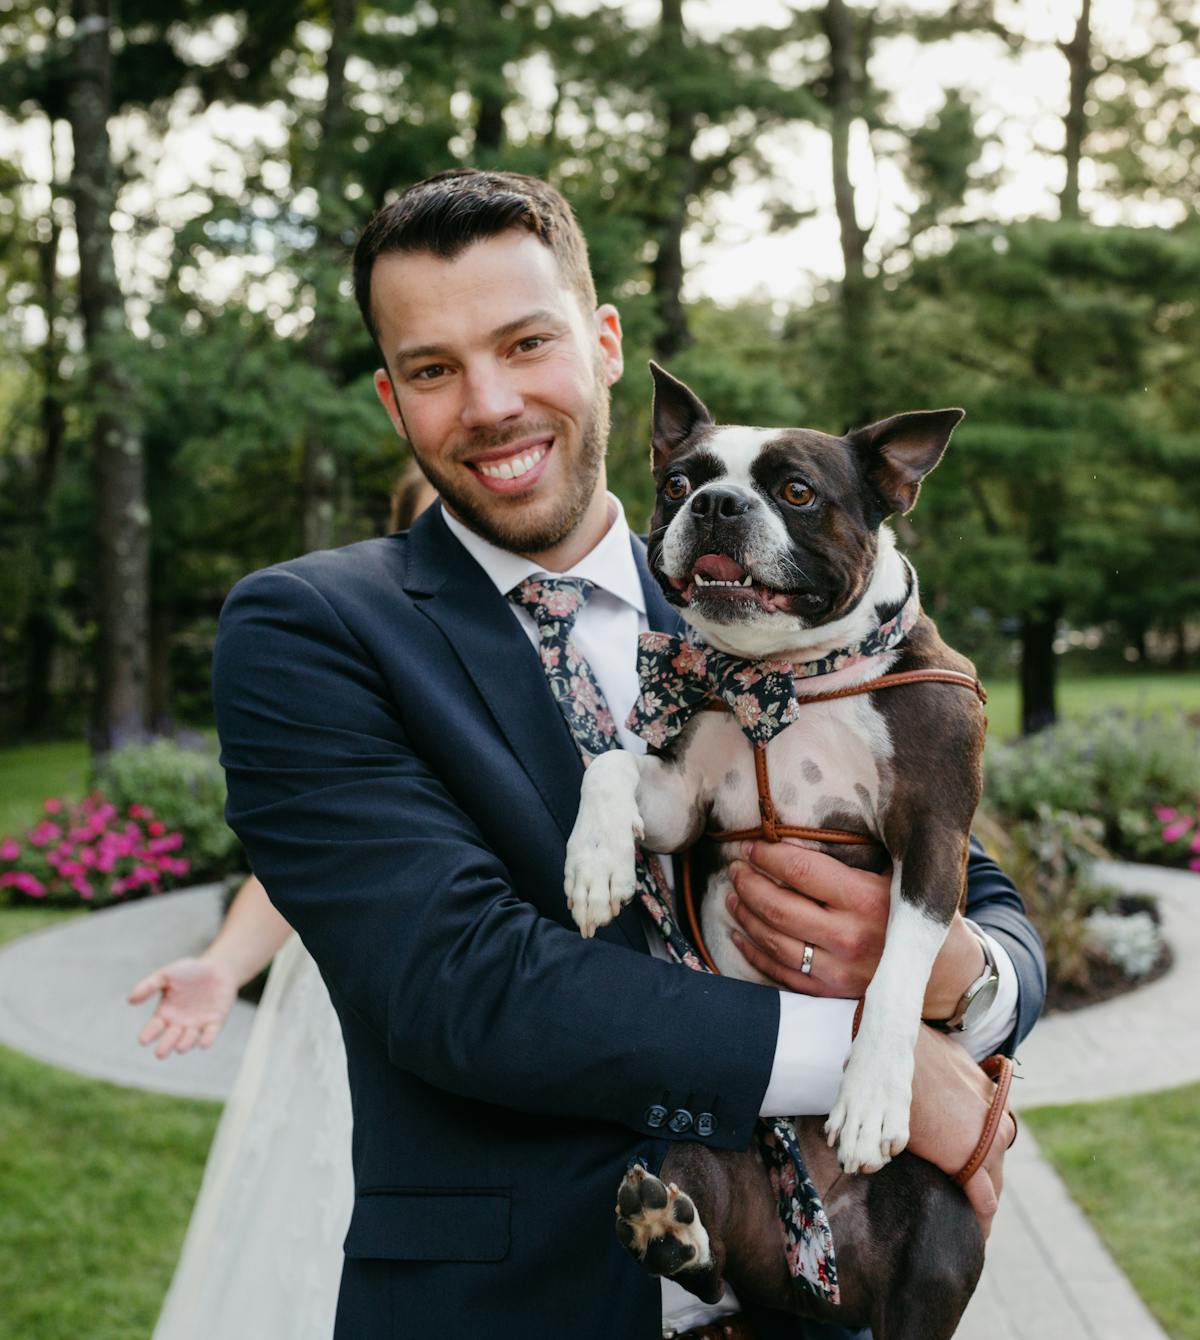 Dogs In Weddings: Make your dog a groomsman